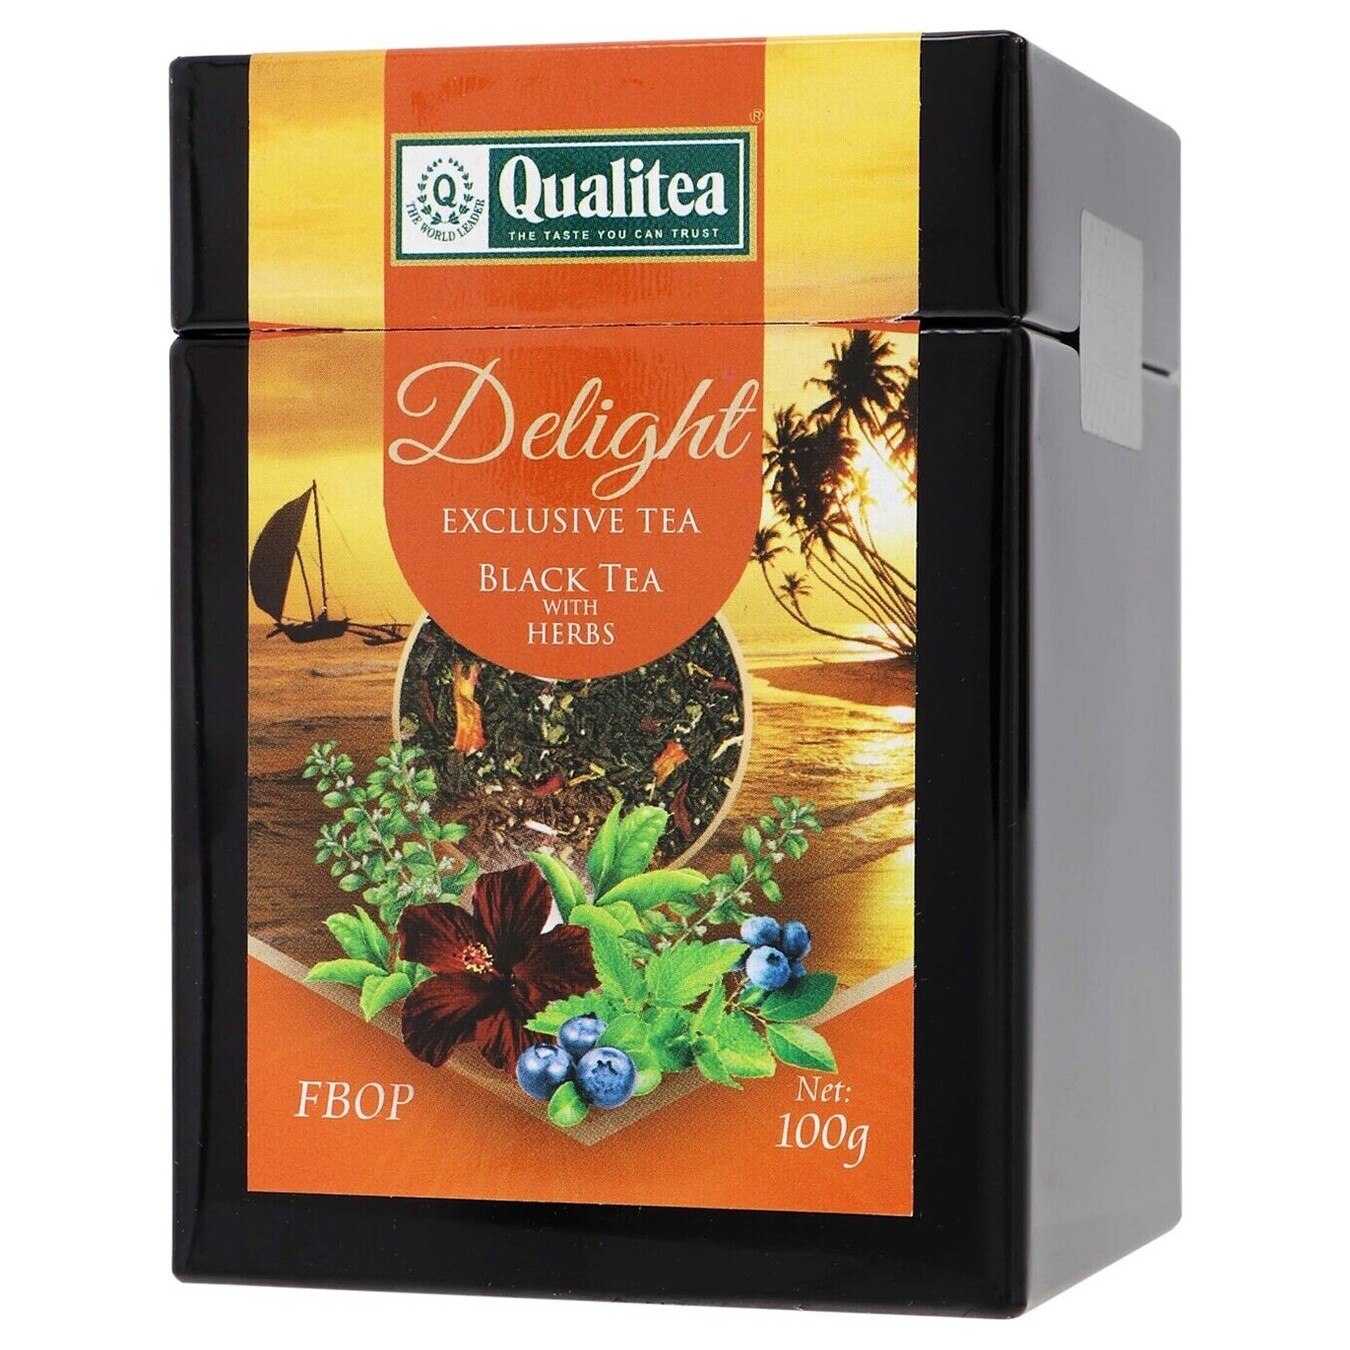 Delight black tea Quality medium leaf with herbs, hibiscus petals and blueberry aroma 100g 2